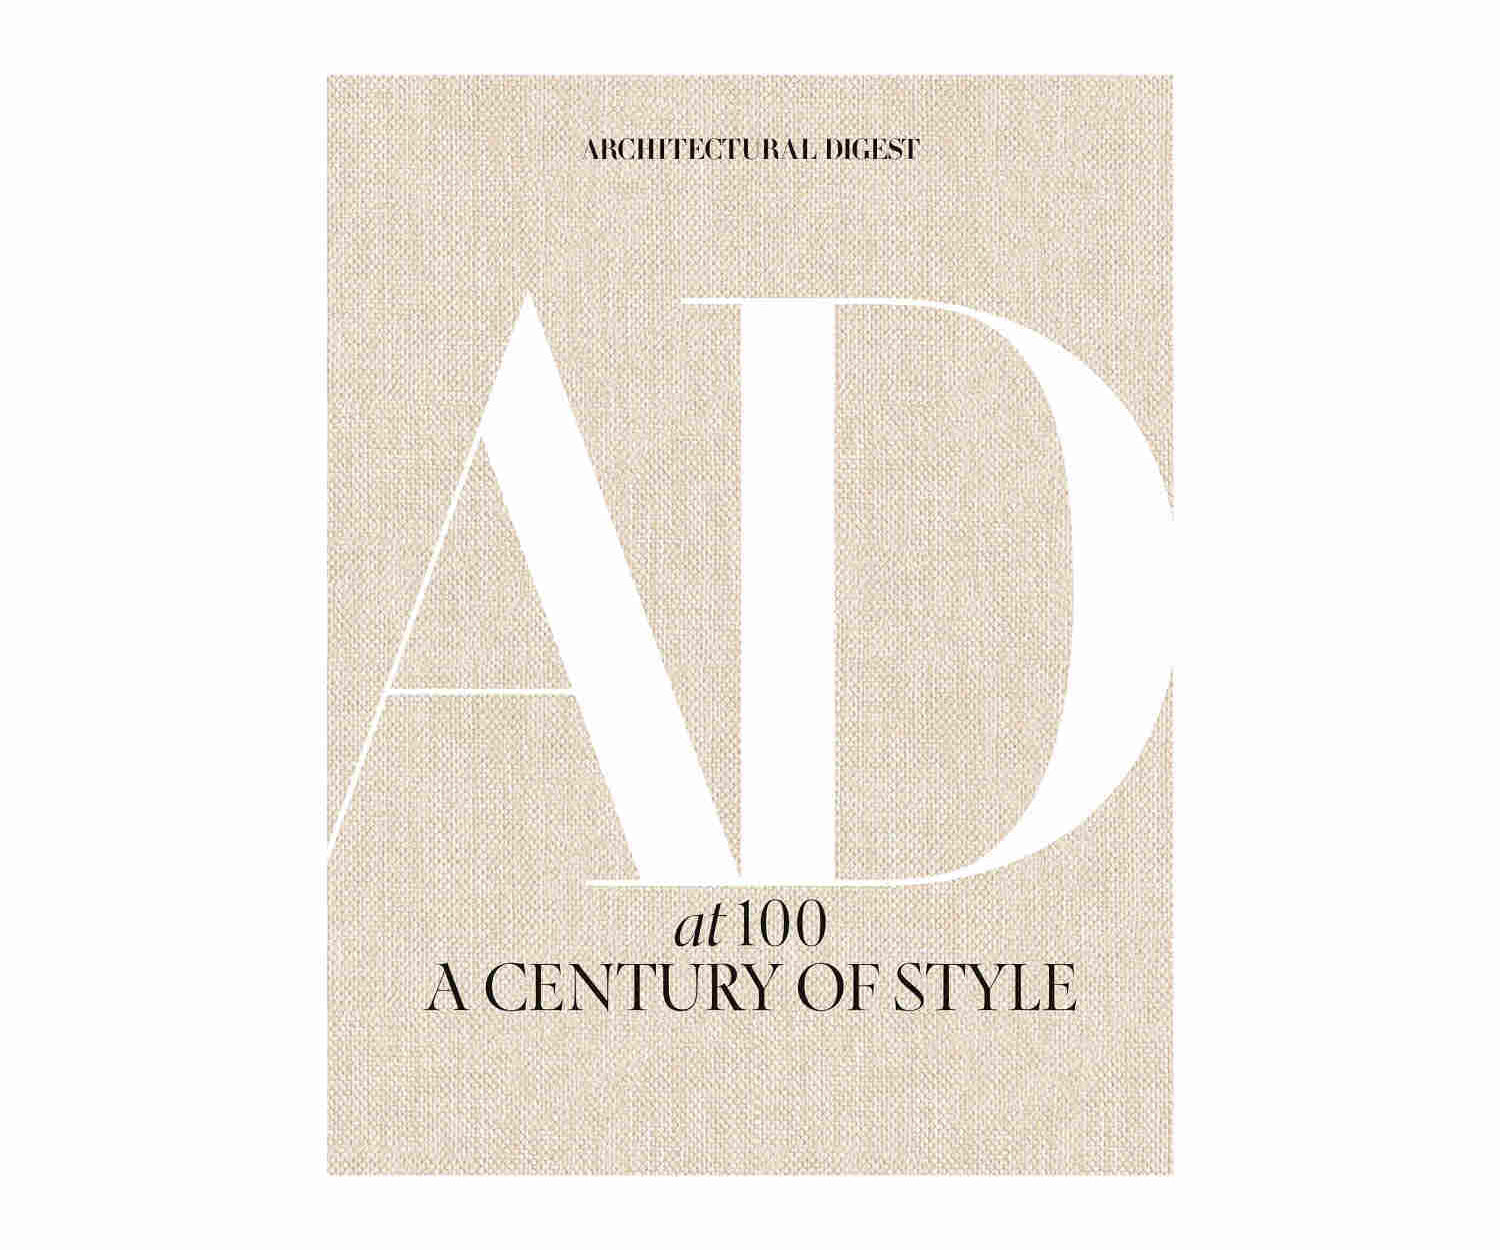 Coffee Table Book - Architectural Digest at 100 - A Century of Style Interior  